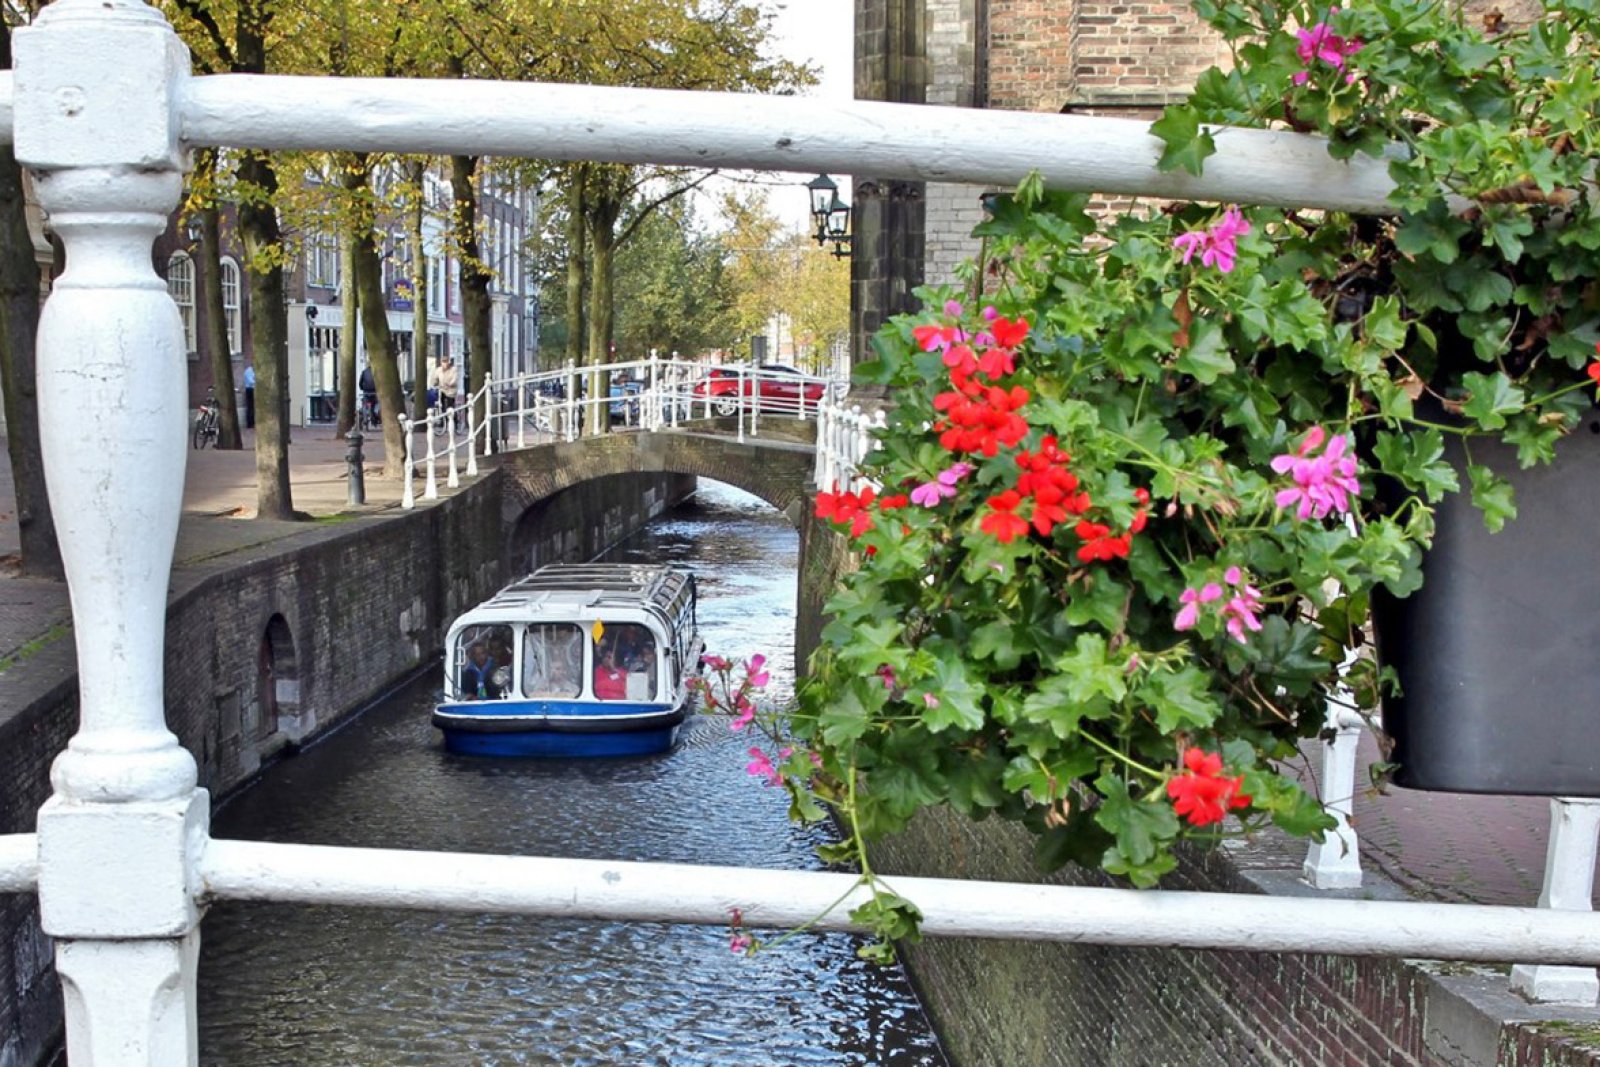 View of boat in canal though the railing of a bridge with a flower pot on the right